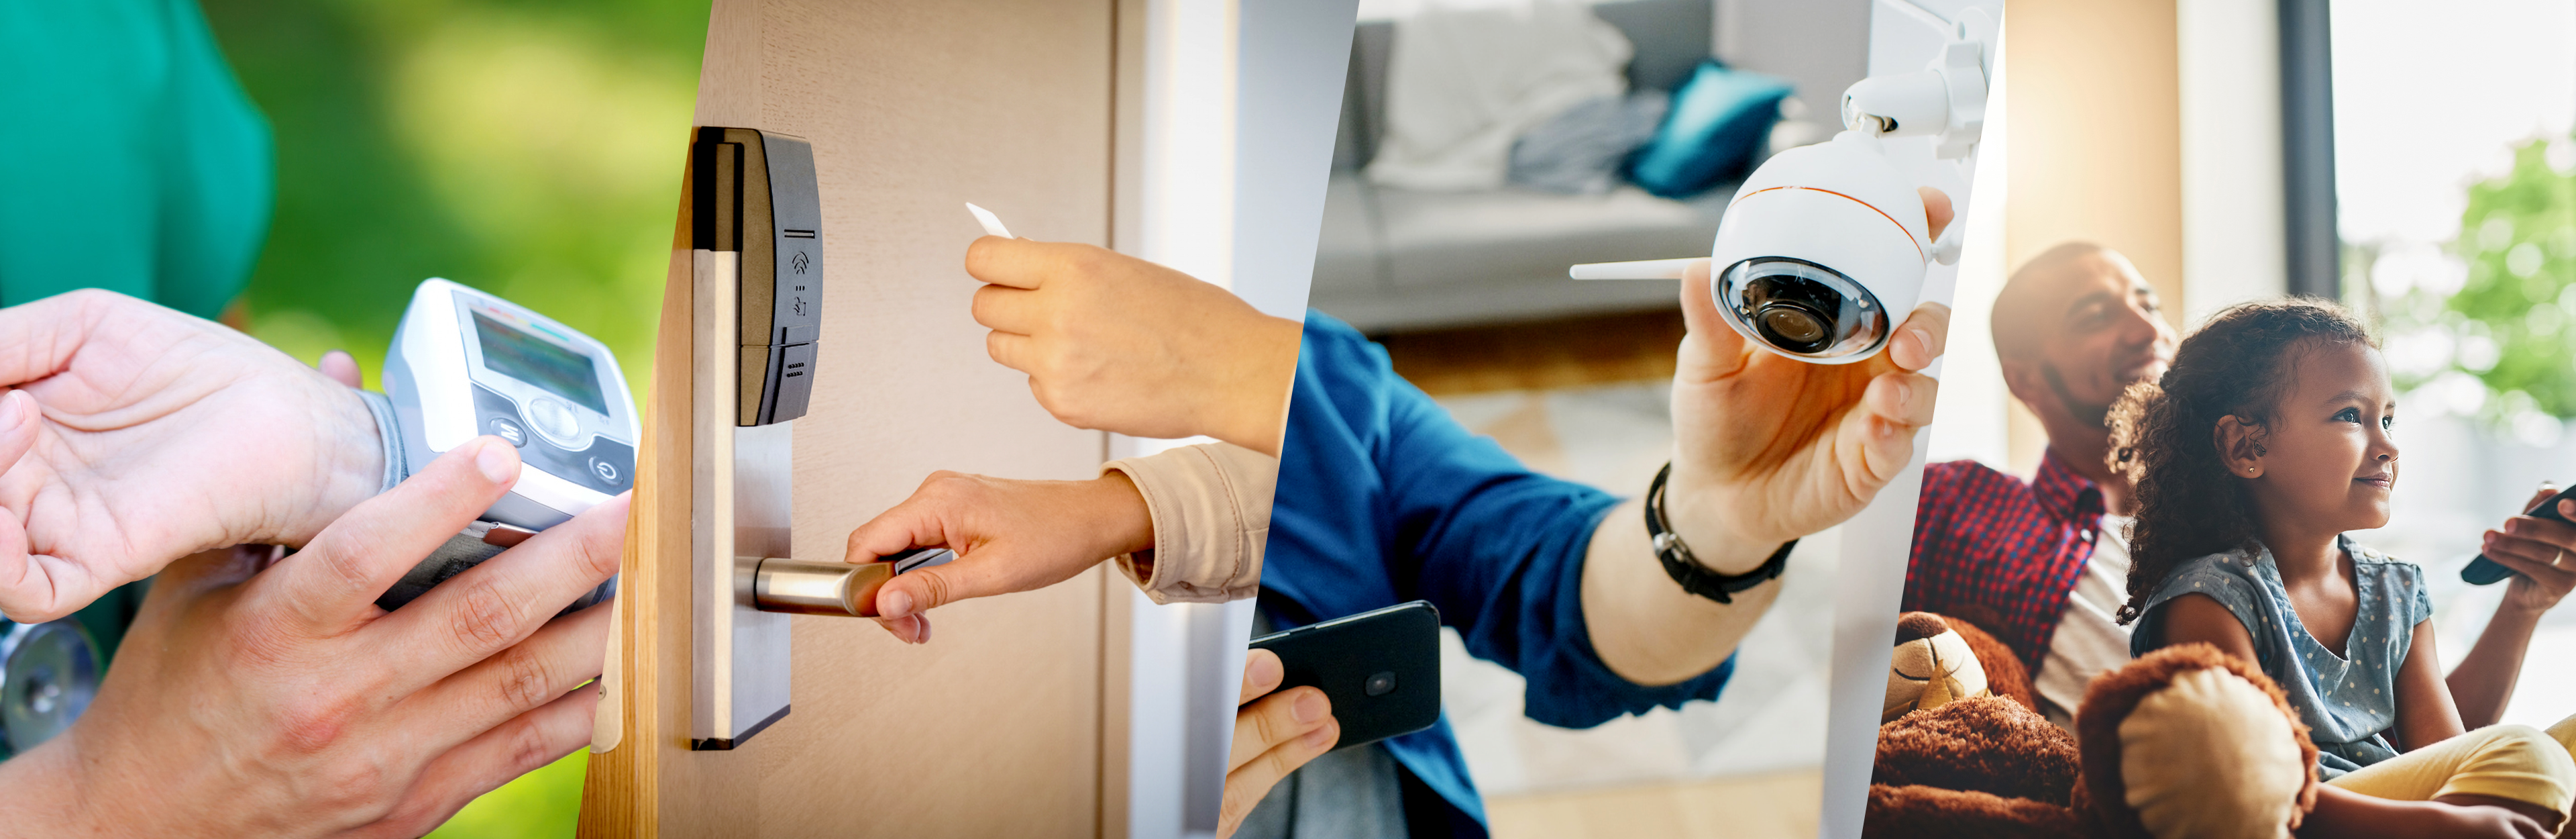 Background image divided into four panels, panel 1 shows a hand held heartbeat monitor, panel two shows a woman's hands opening a hotel door with an electronic card, third panel shows a man's hands touching a securiity camera while holding a black cellphone, fourth panel shows a dad and daughter watching TV in their living room